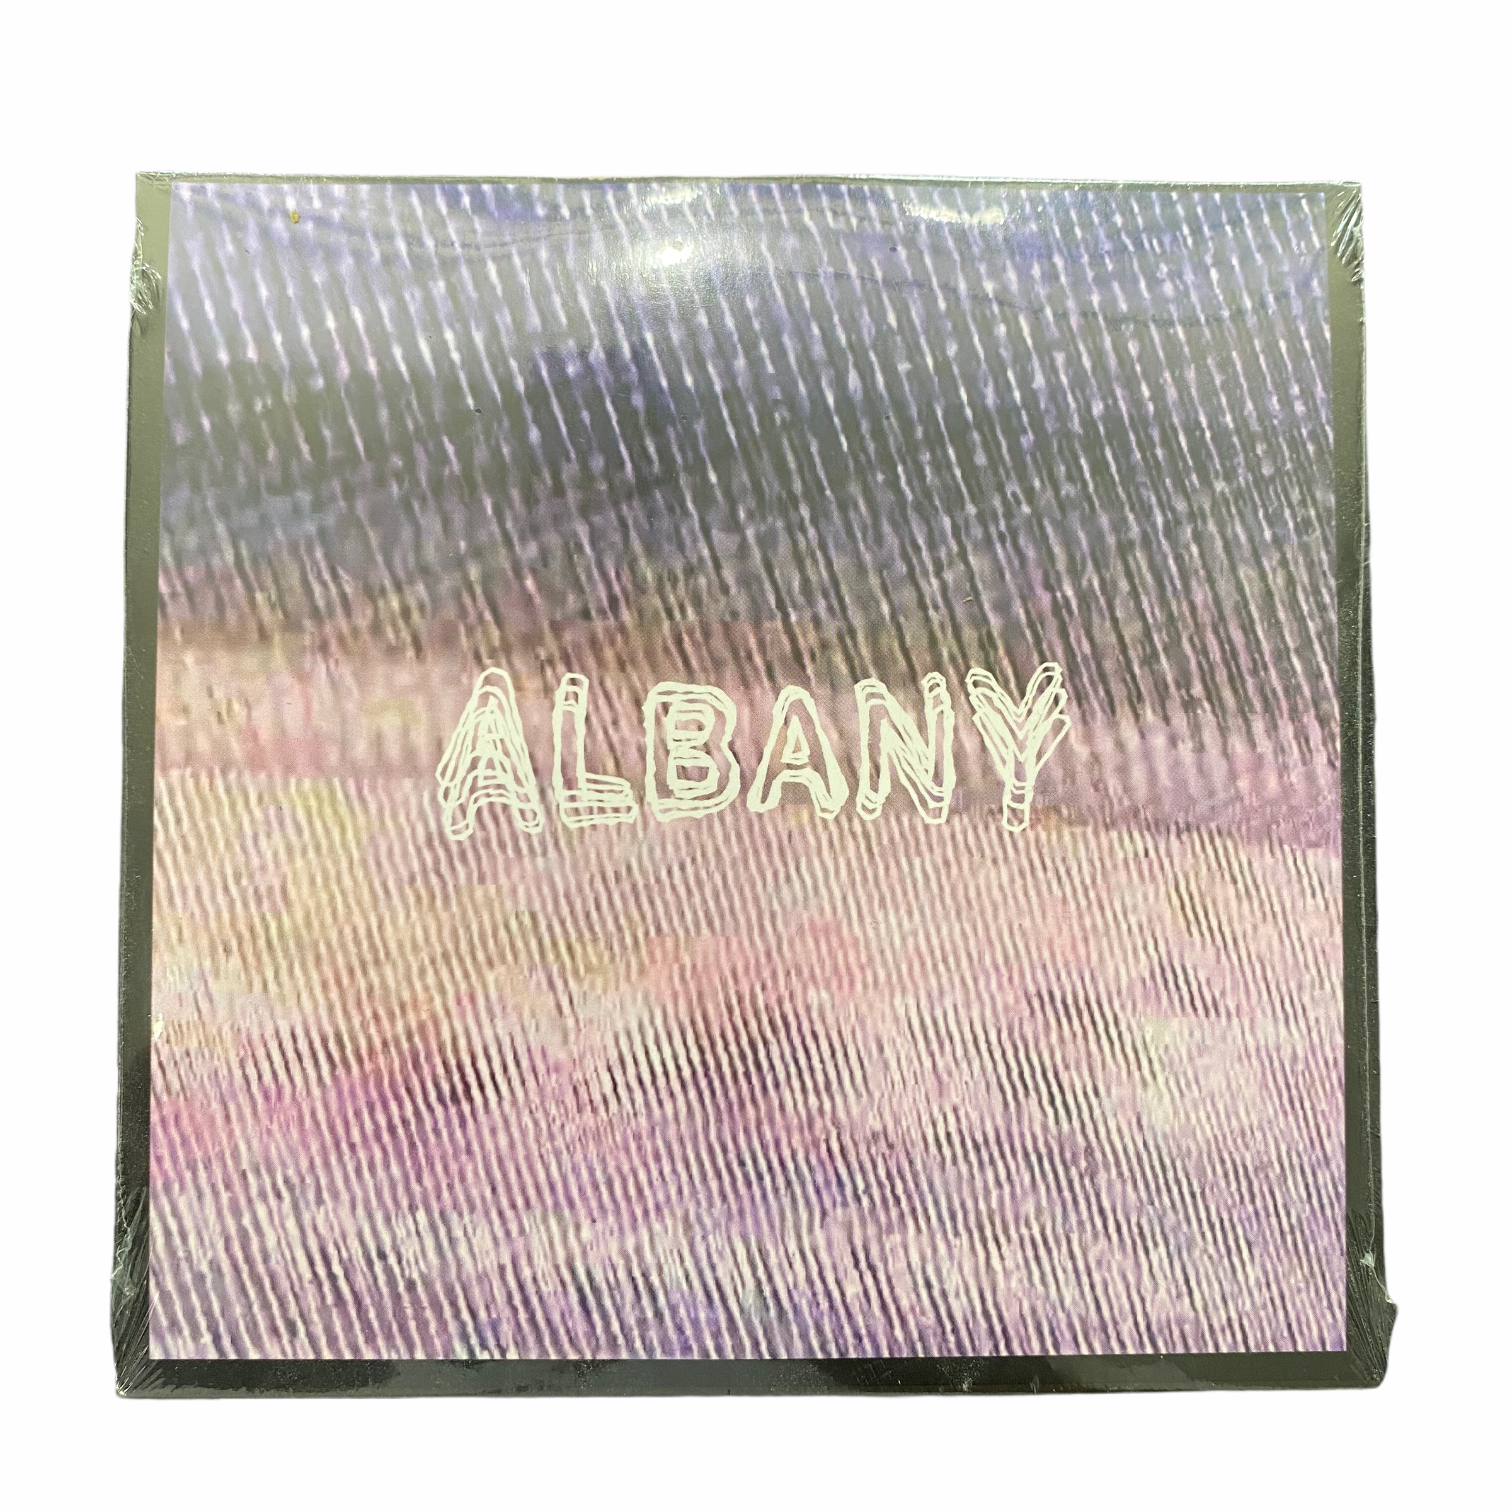 DVD Cover with Albany and Static Fuzz on it.